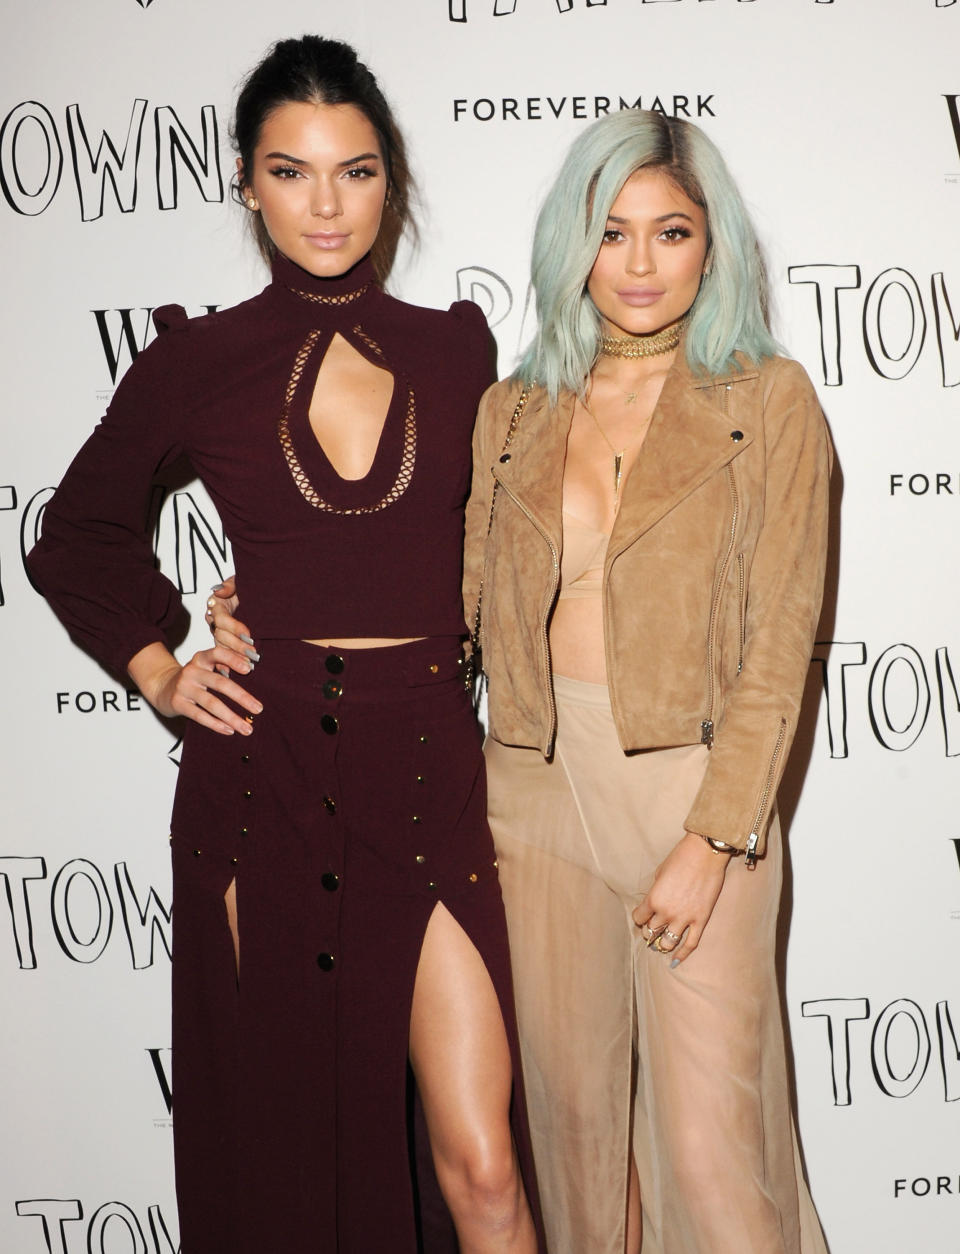 WEST HOLLYWOOD, CA - JULY 18:  Kendall Jenner and sister Kylie Jenner arrive at the Screening Of 20th Century Fox's 'Paper Towns' at The London West Hollywood on July 18, 2015 in West Hollywood, California.  (Photo by Jon Kopaloff/FilmMagic)